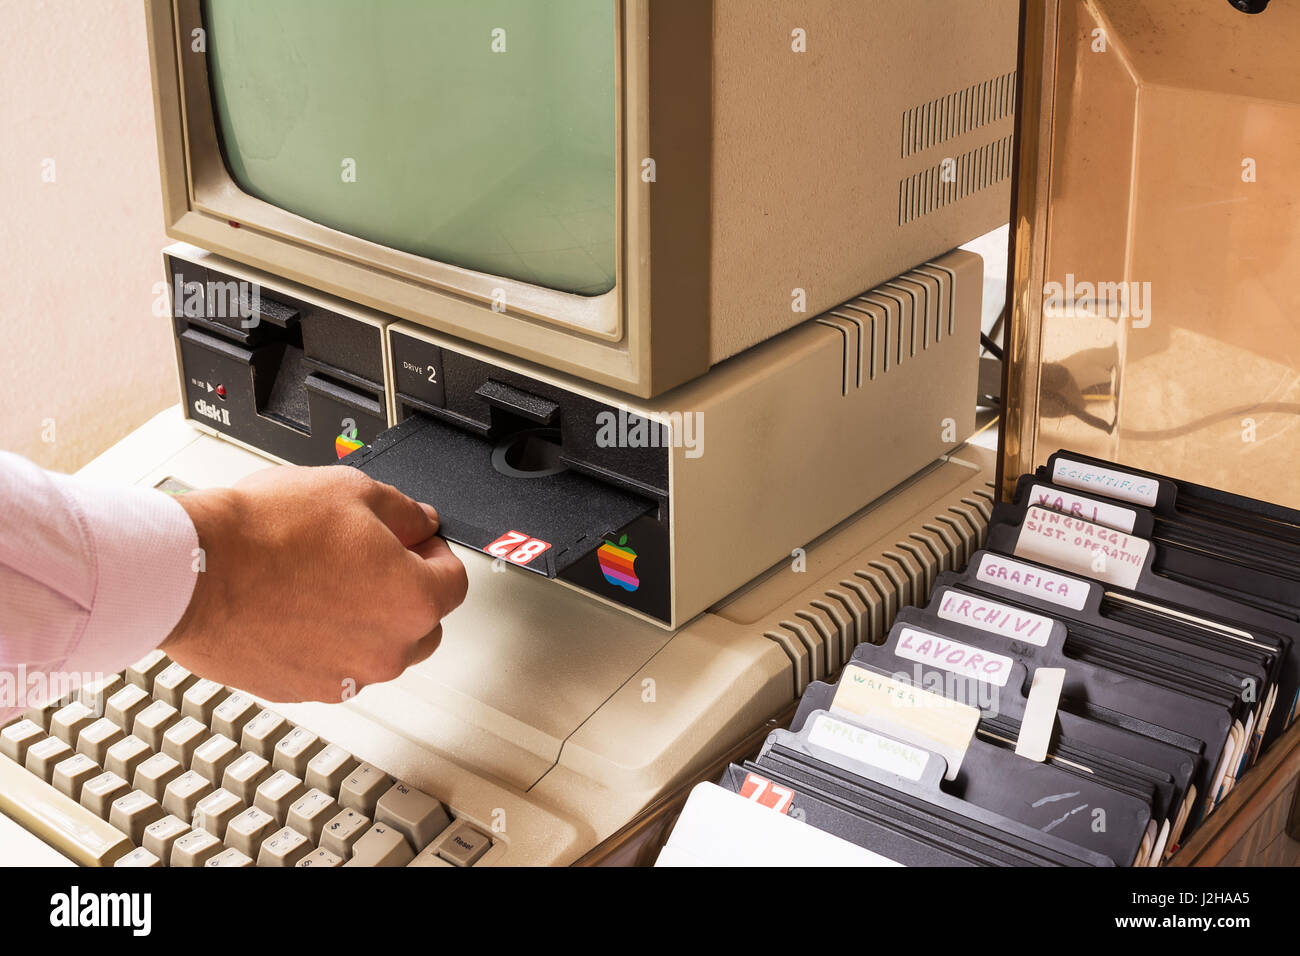 Aged Apple computer and hand insert floppy inside Stock Photo